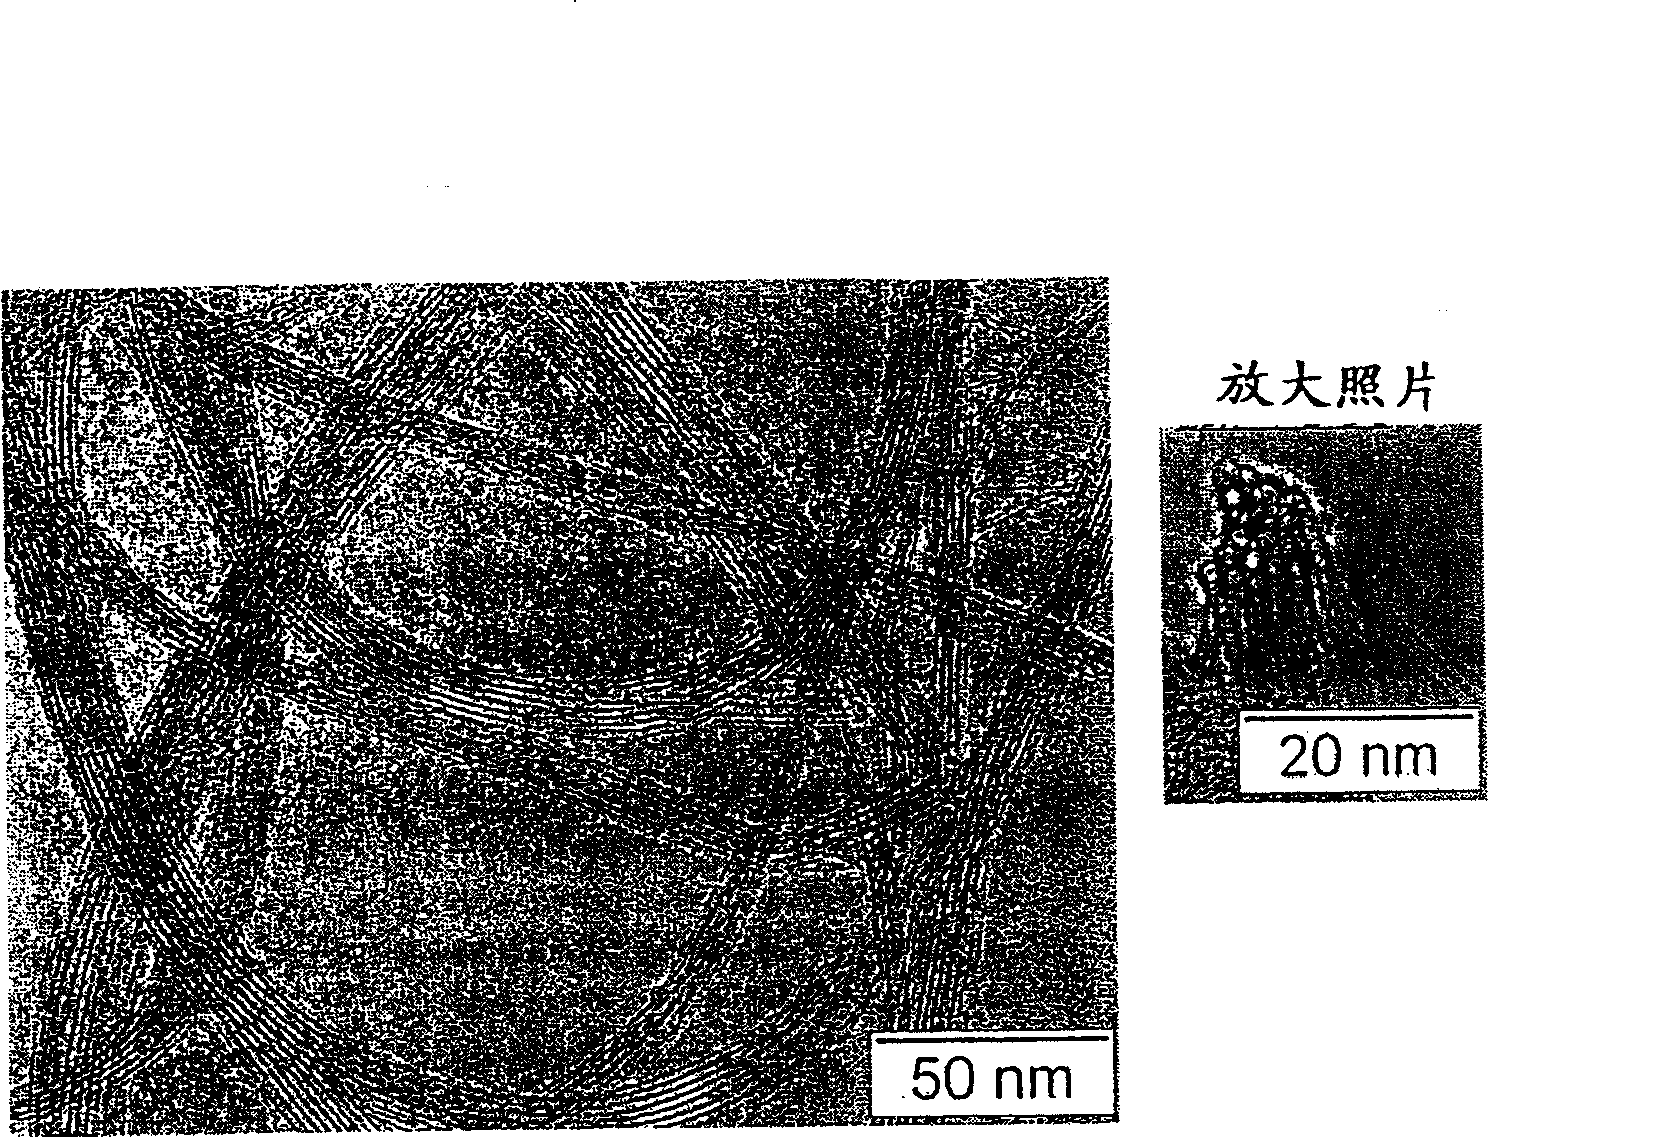 Single-walled carbon nanotube, carbon fiber aggregate containing the single-walled carbon nanotube, and method for production of the single-walled carbon nanotube or the carbon fiber aggregate